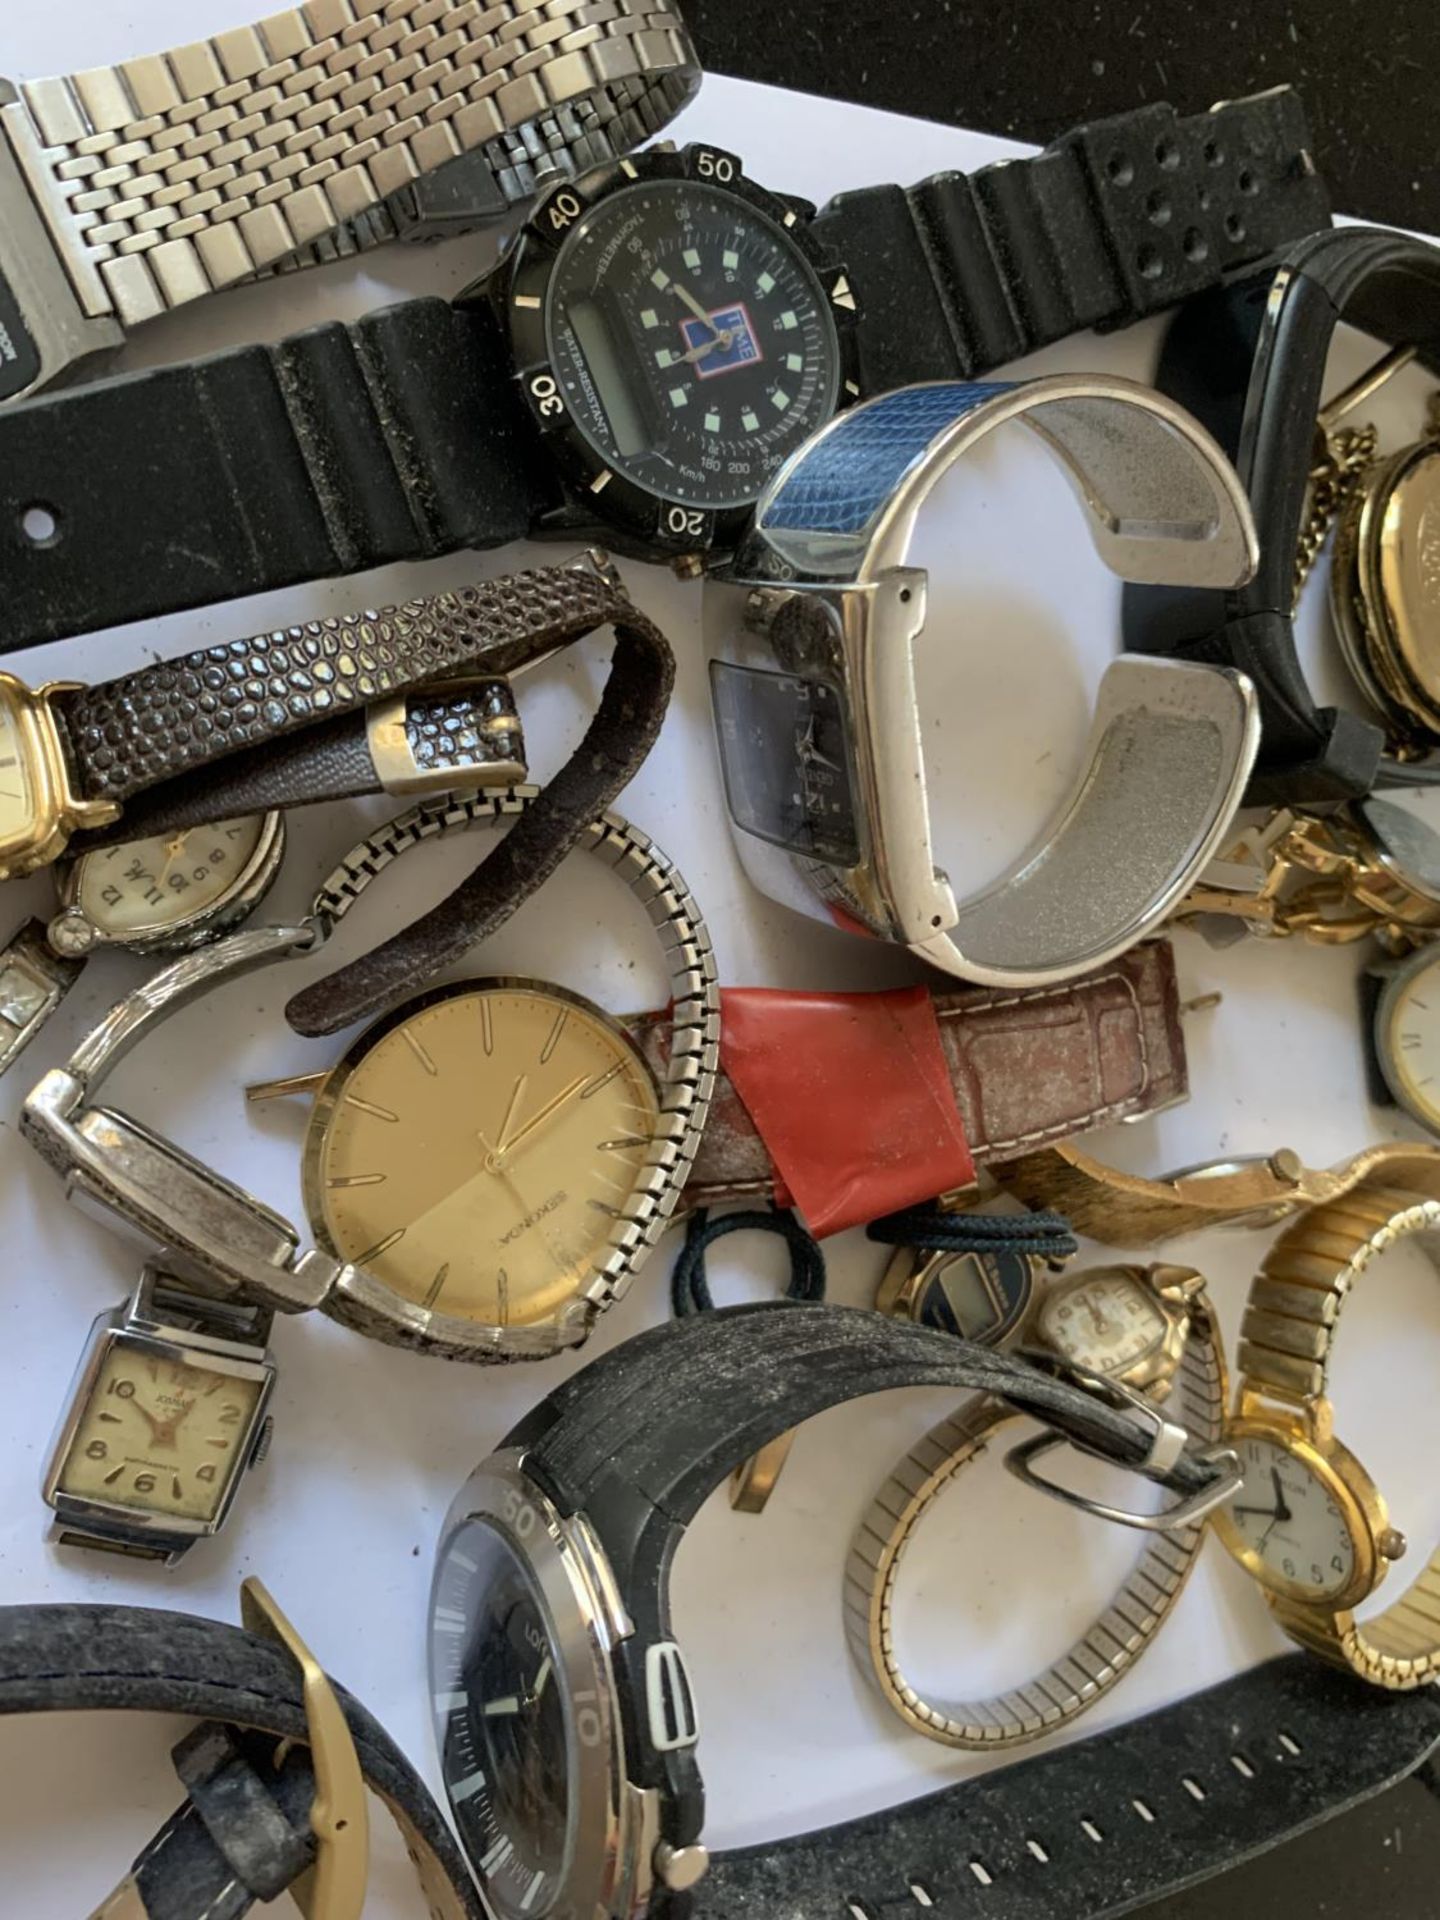 A LARGE COLLECTION OF WATCHES AND WATCH PARTS - Image 3 of 4